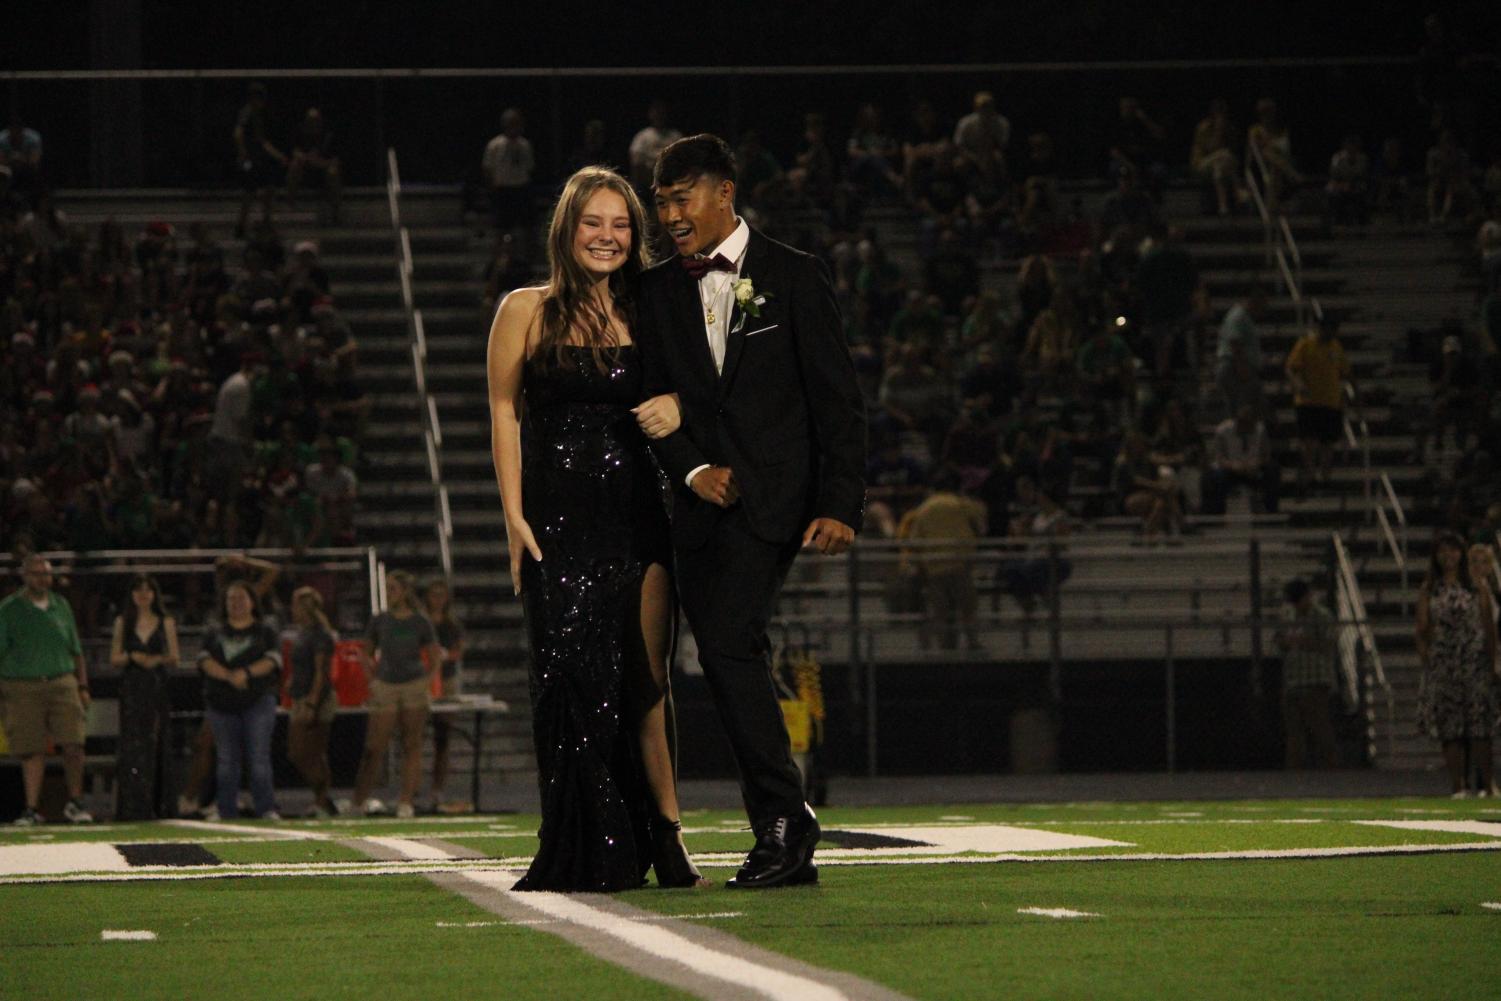 Homecoming+game+%28Photos+by+Alyssa+Lai%29